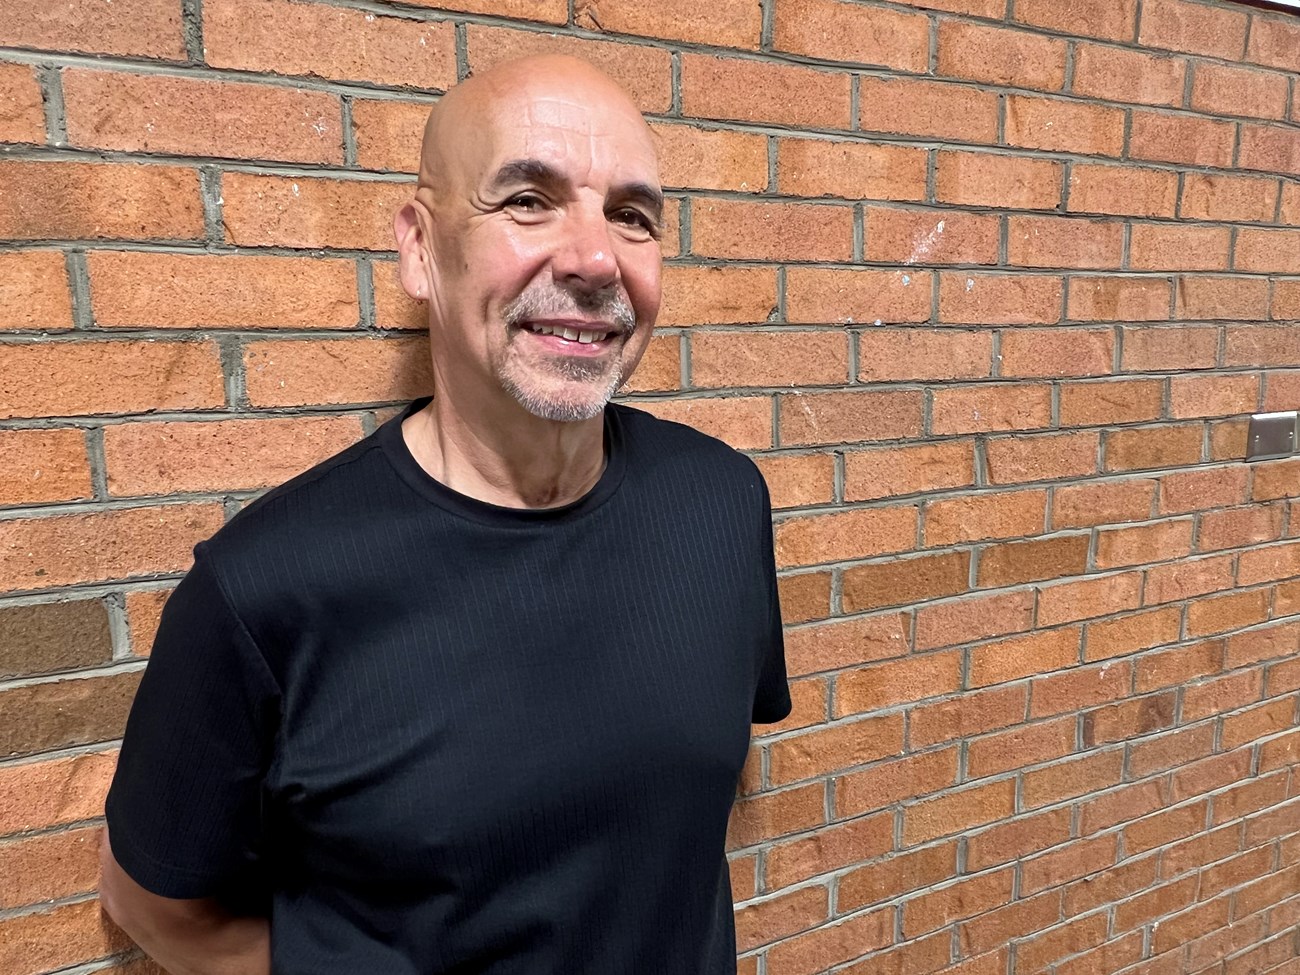 A smiling, bald man with a grey beard stands against a brick wall.